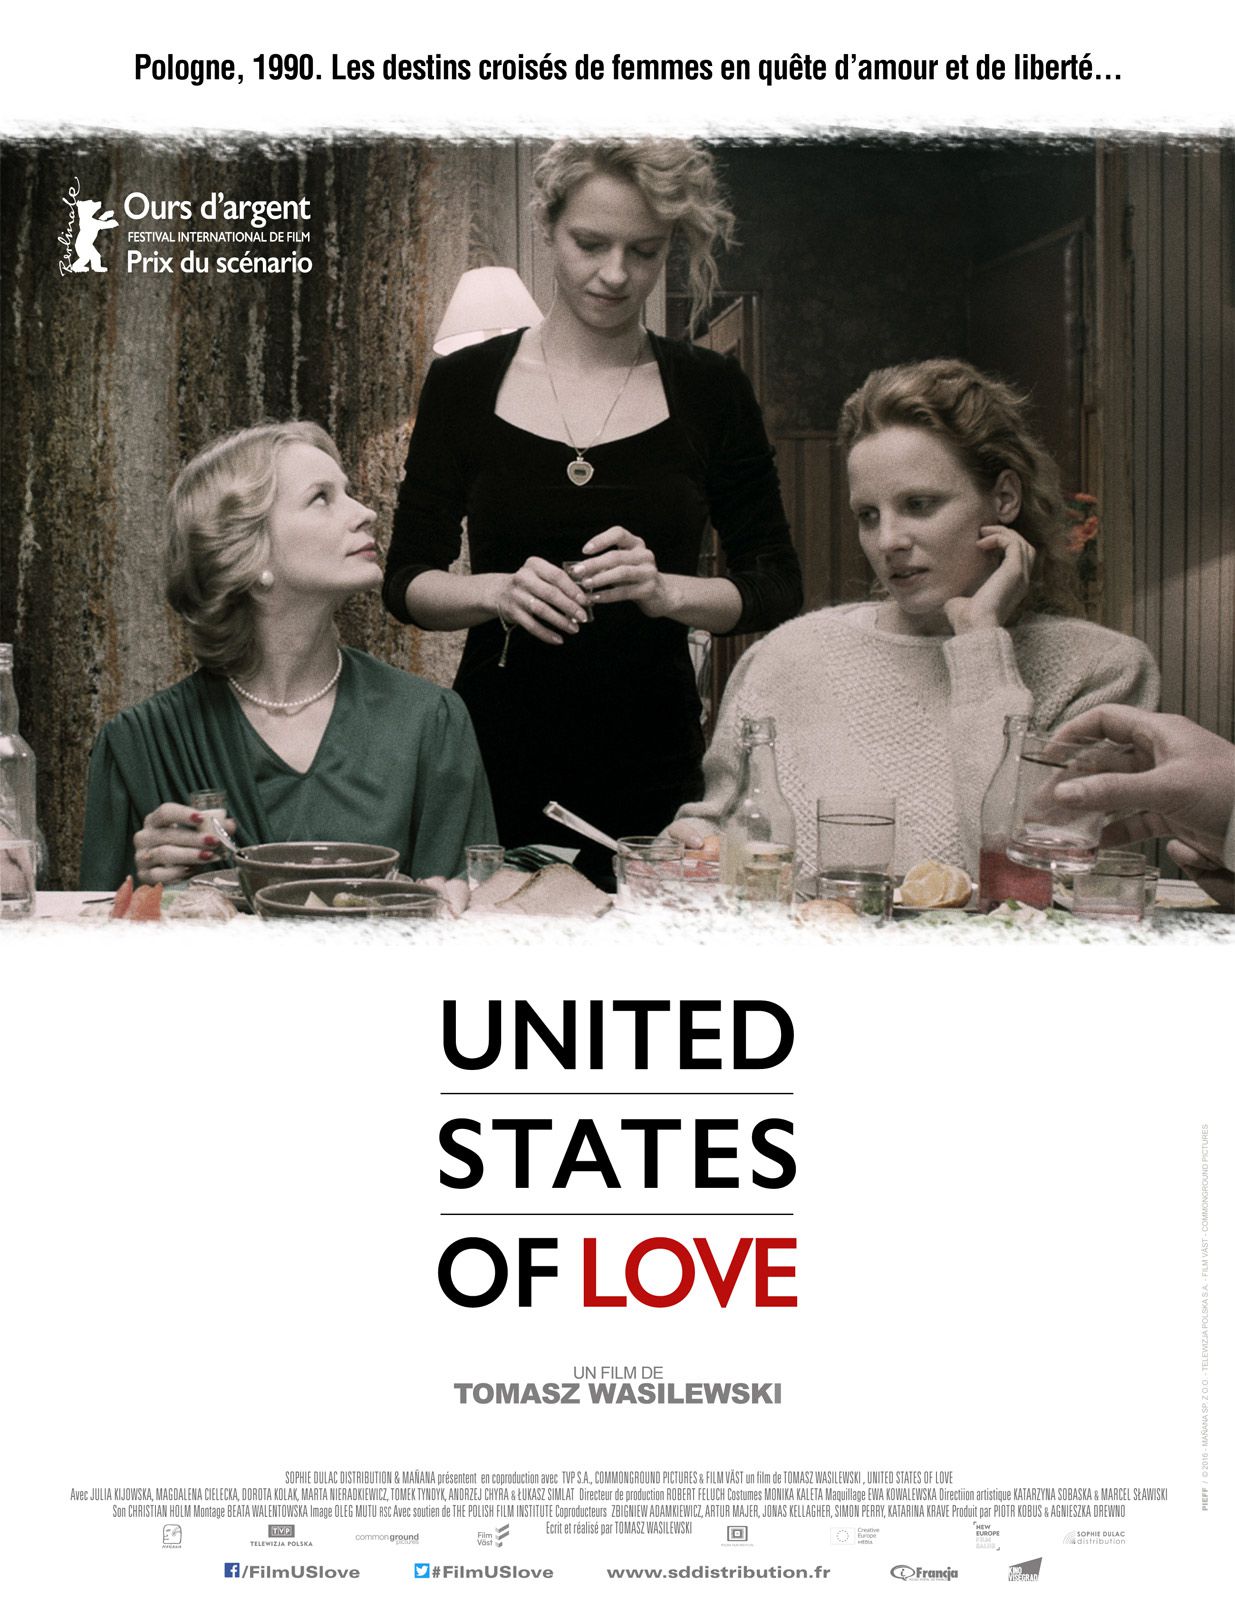 United States of Love - Film (2017) streaming VF gratuit complet